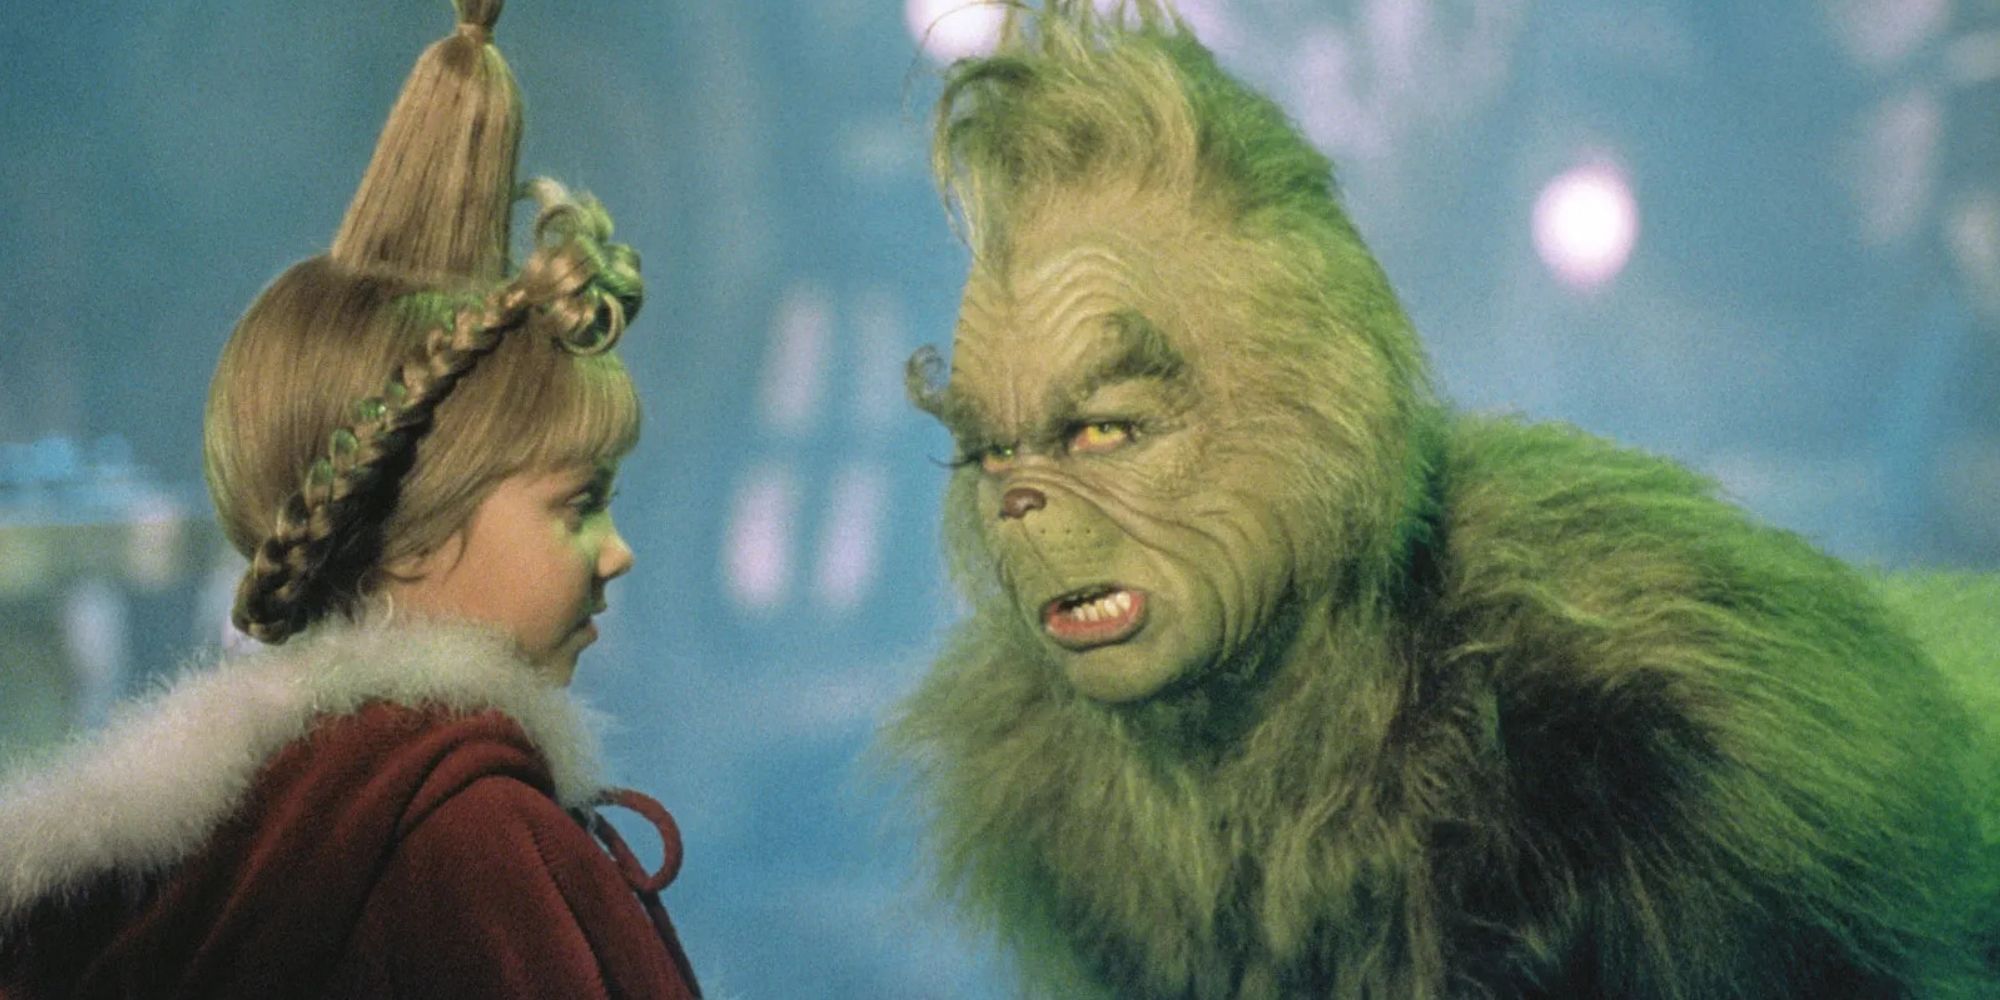 The Grinch and Cindy Lou Who in 'How the Grinch Stole Christmas' (2000)